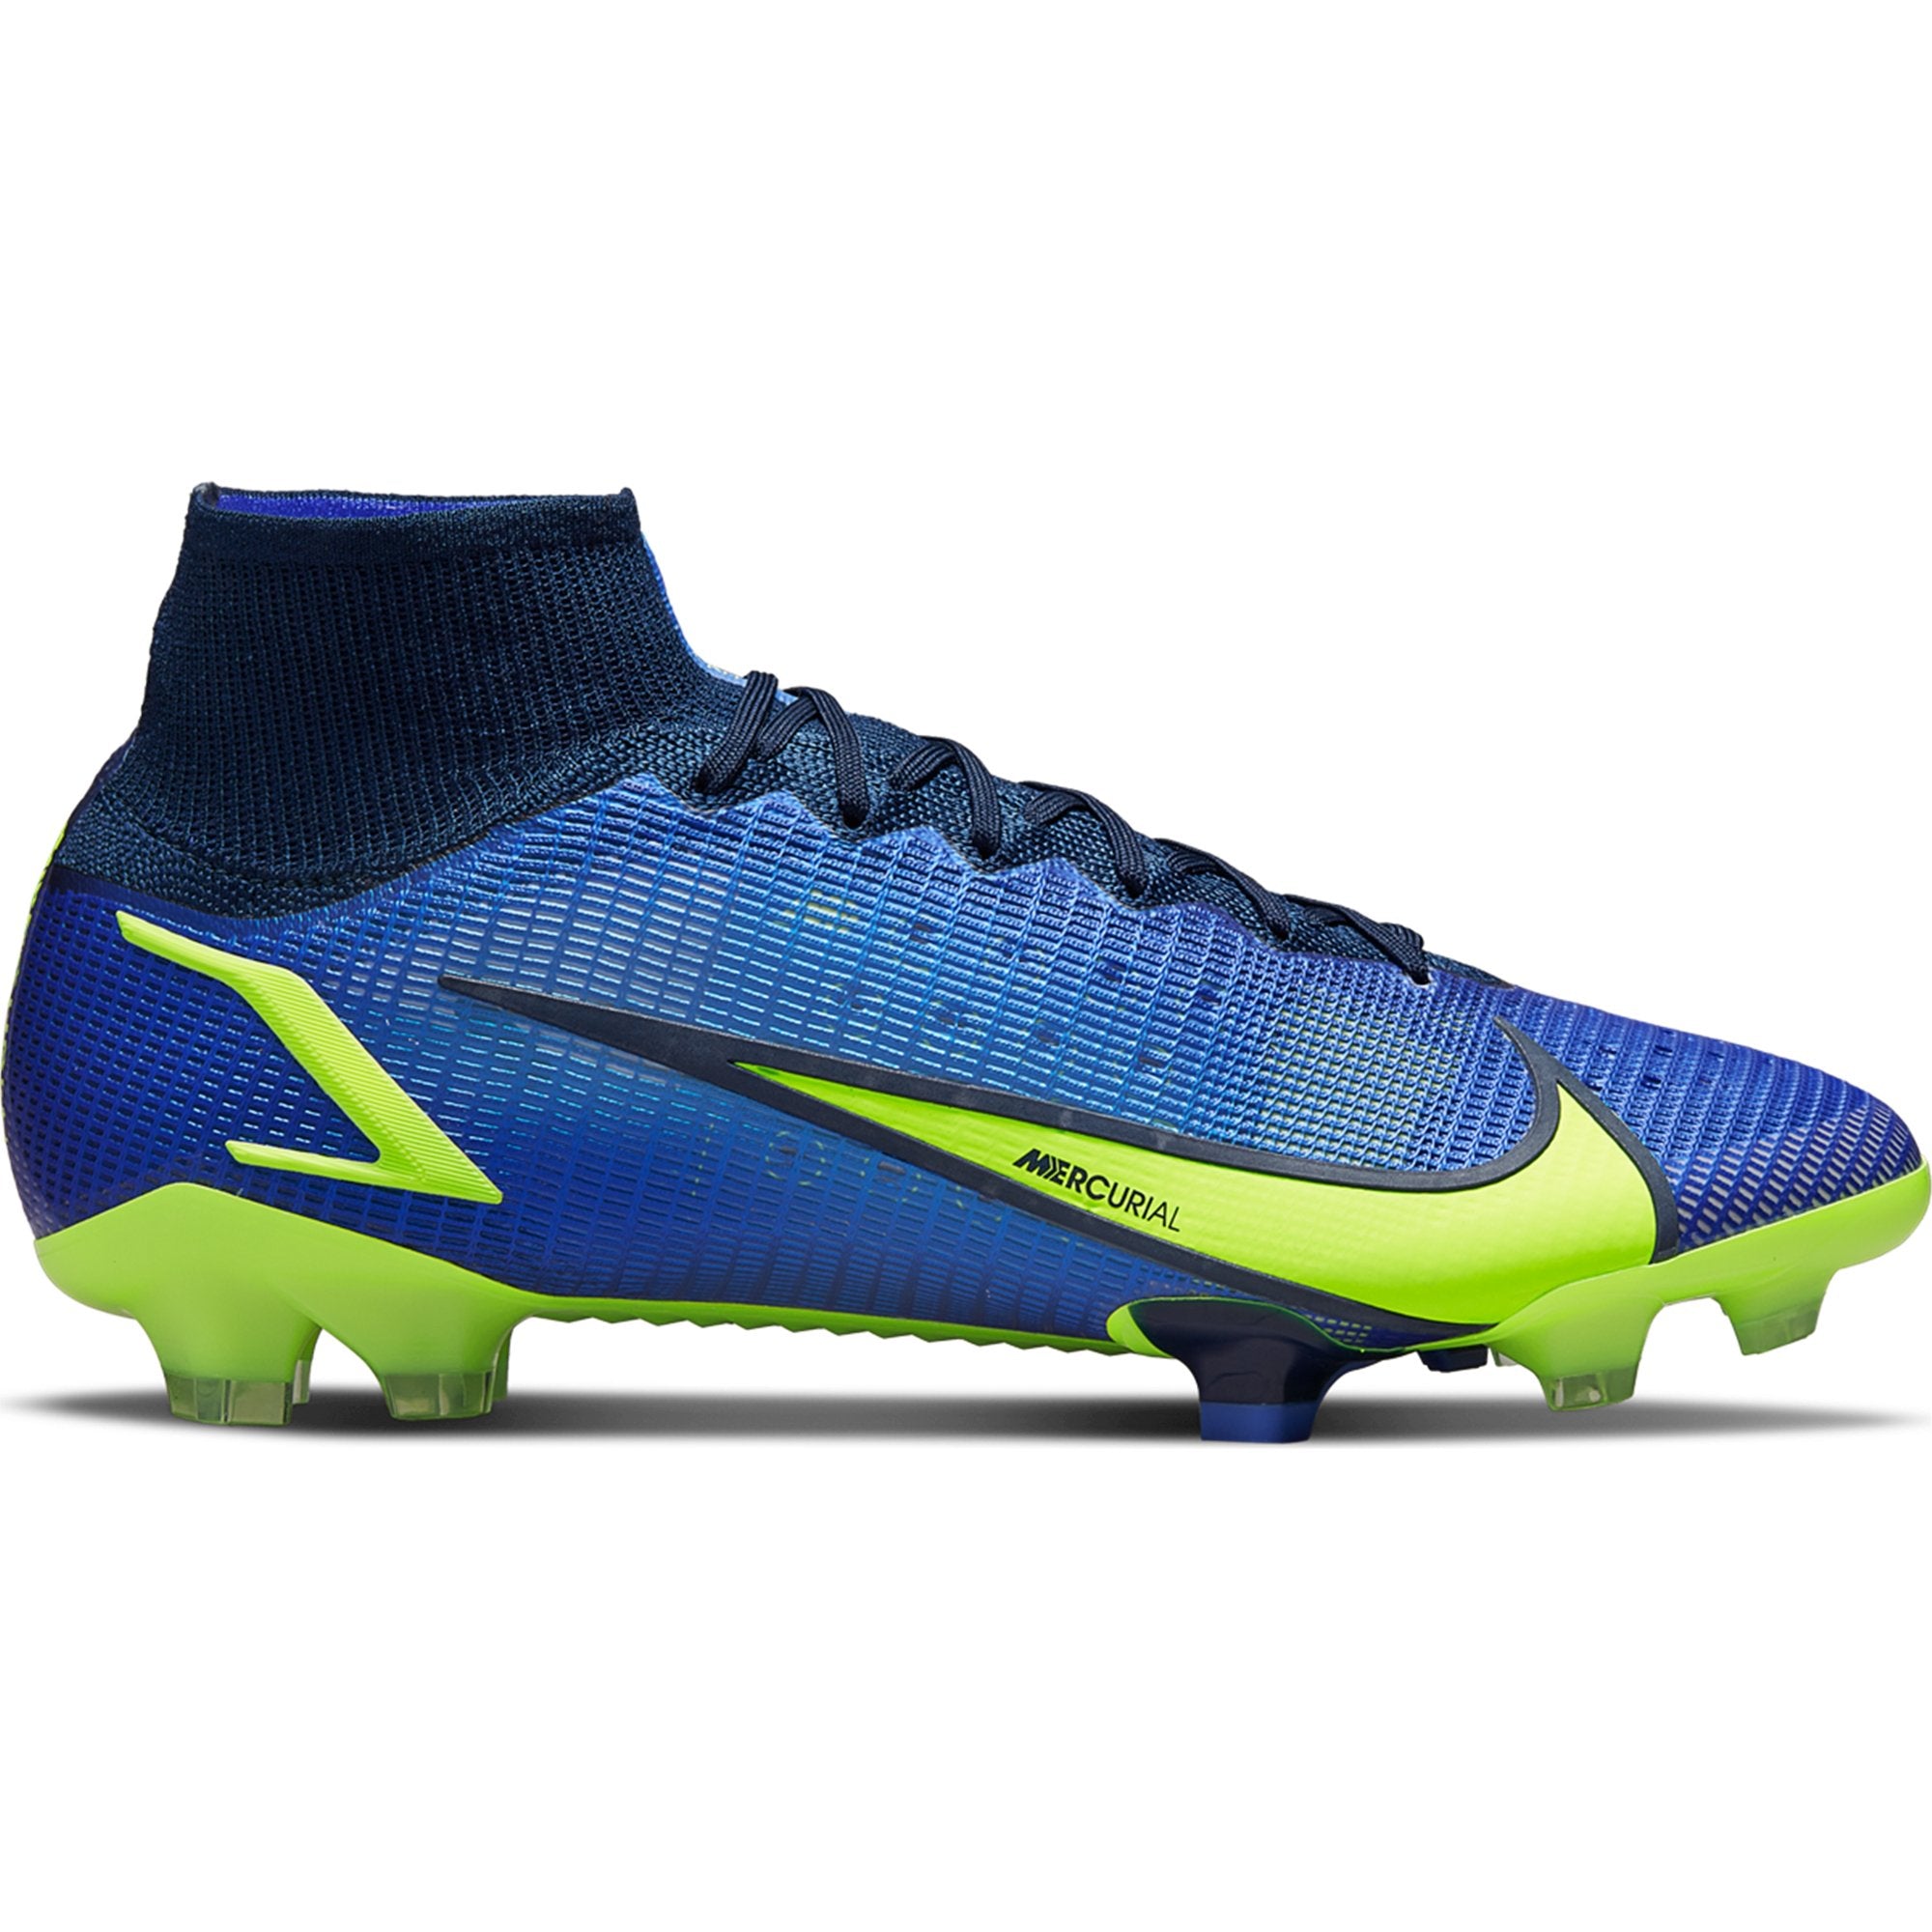 Nike Mercurial Superfly 8 Elite FG Firm Soccer Cleat - Sapphire/Volt/Blue Void CV0958-574 – Soccer Zone USA